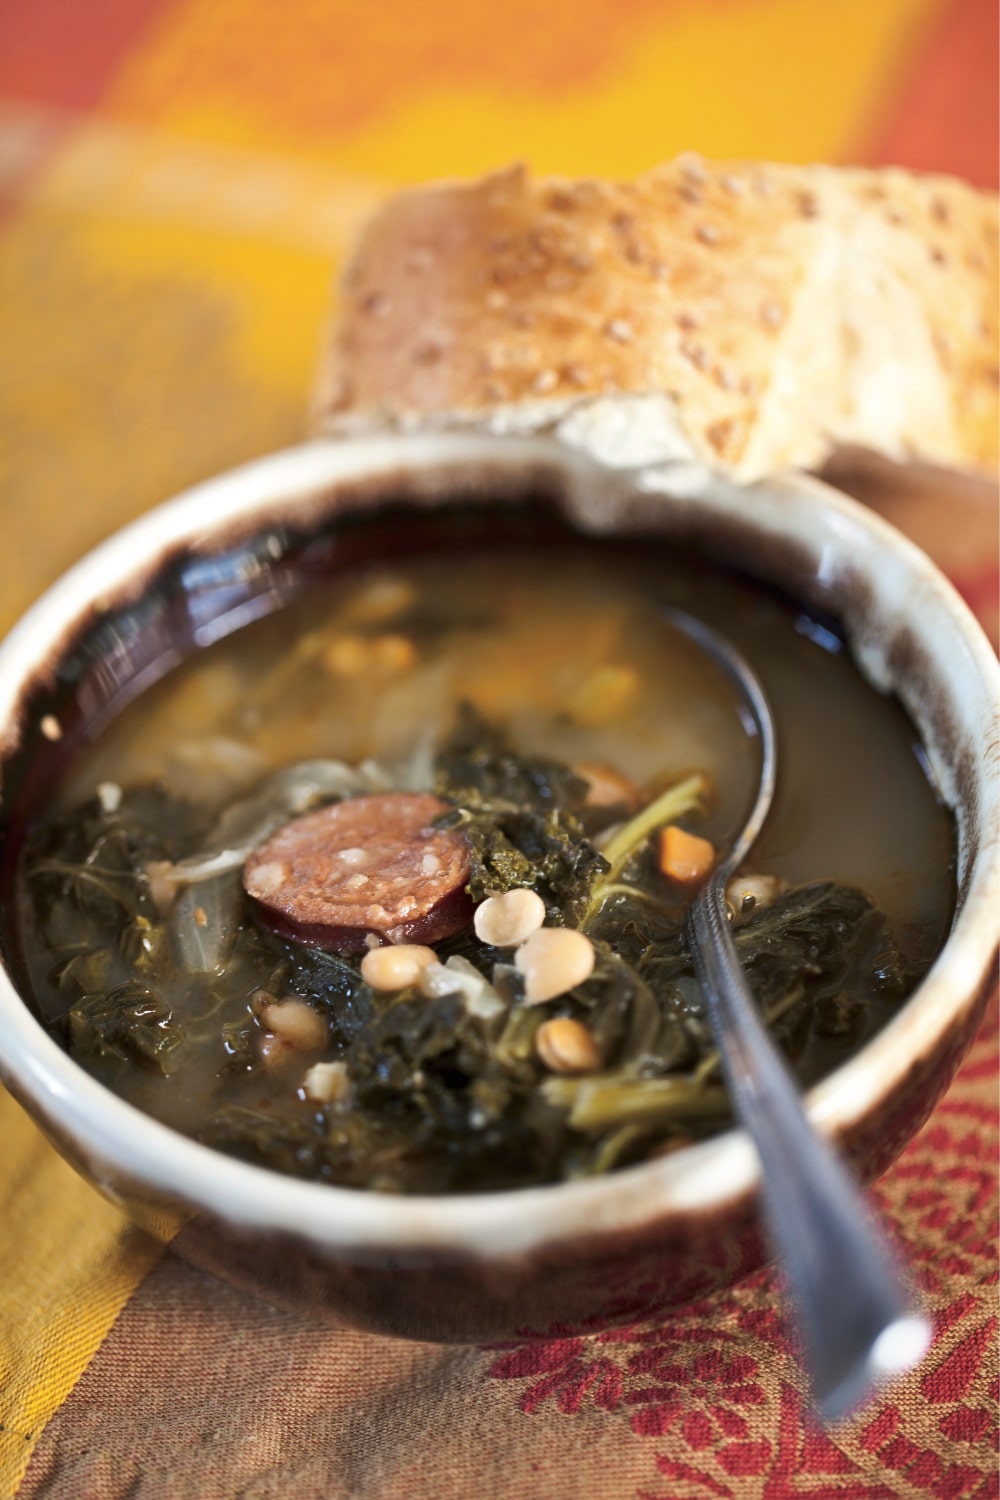 Portuguese Kale Soup Recipe | Best Cook Ruth O'Donnell - New England Today